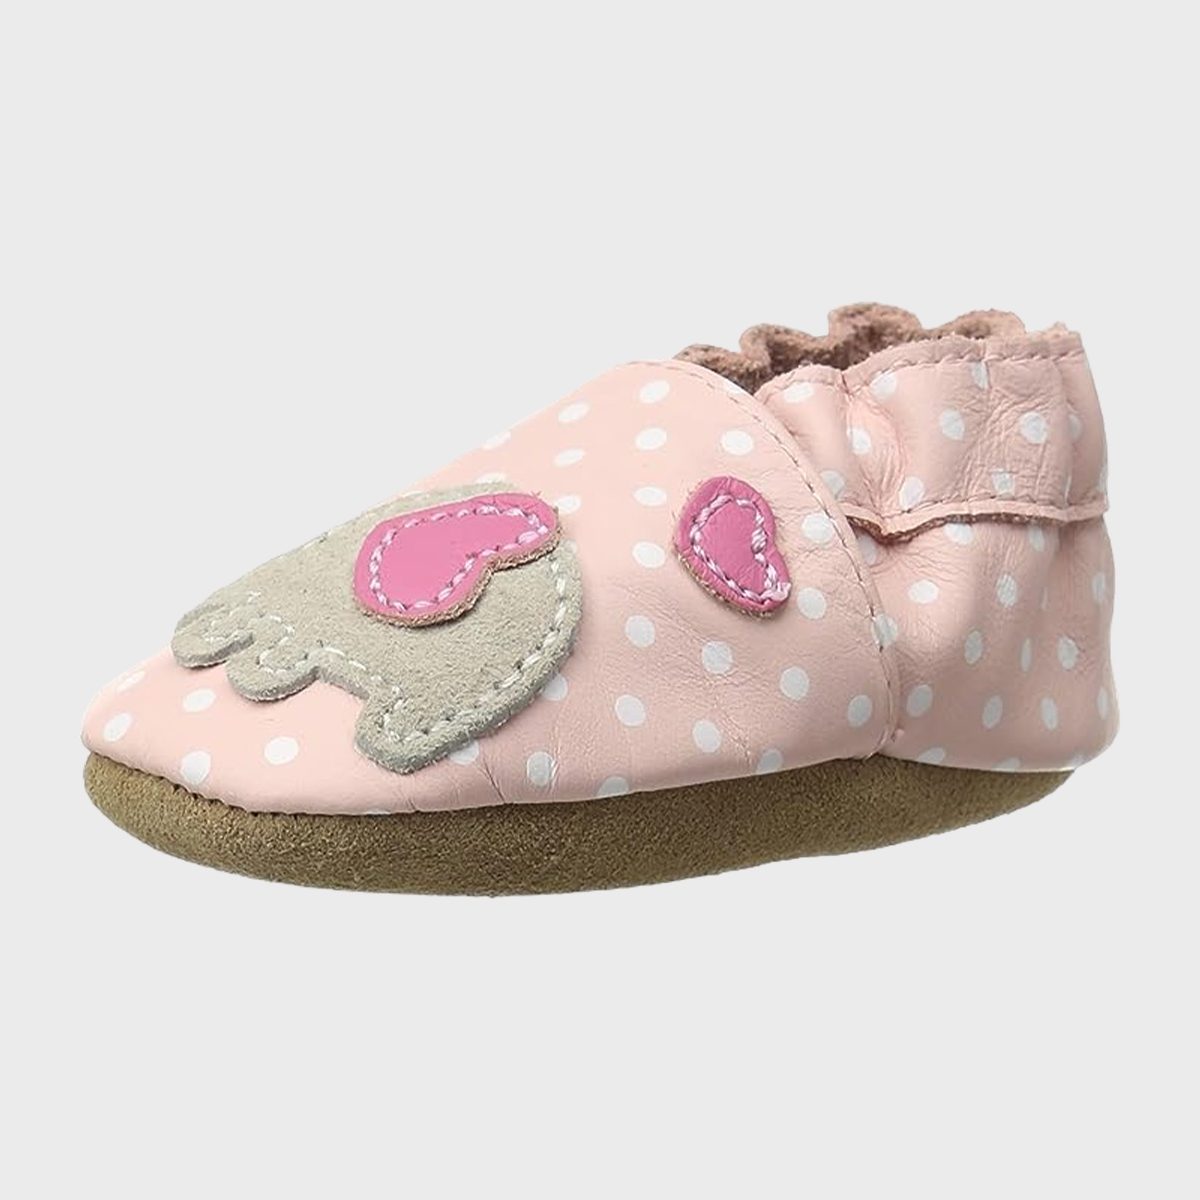 <p>Not only are these <a href="https://www.amazon.com/Robeez-Slip-Resistant-Slippers-Moccasins-Toddler/dp/B00J09SNL0" rel="noopener noreferrer">crib shoes</a> available in dozens of adorable colors and patterns, but they're actually approved by the American Podiatric Medical Association. They feature a soft suede sole that not only grips the floor but also flexes and bends with every wobbly step.</p> <p>This allows the full range of motion the baby needs for <a href="https://www.rd.com/article/okeeffes-healthy-feet/">healthy foot</a> development. They're also easy to get on and off, but thanks to their elasticized ankle, you won't have to worry about them slipping off.</p> <p class="listicle-page__cta-button-shop"><a class="shop-btn" href="https://www.amazon.com/Robeez-Slip-Resistant-Slippers-Moccasins-Toddler/dp/B00J09SNL0">Shop Now</a></p>